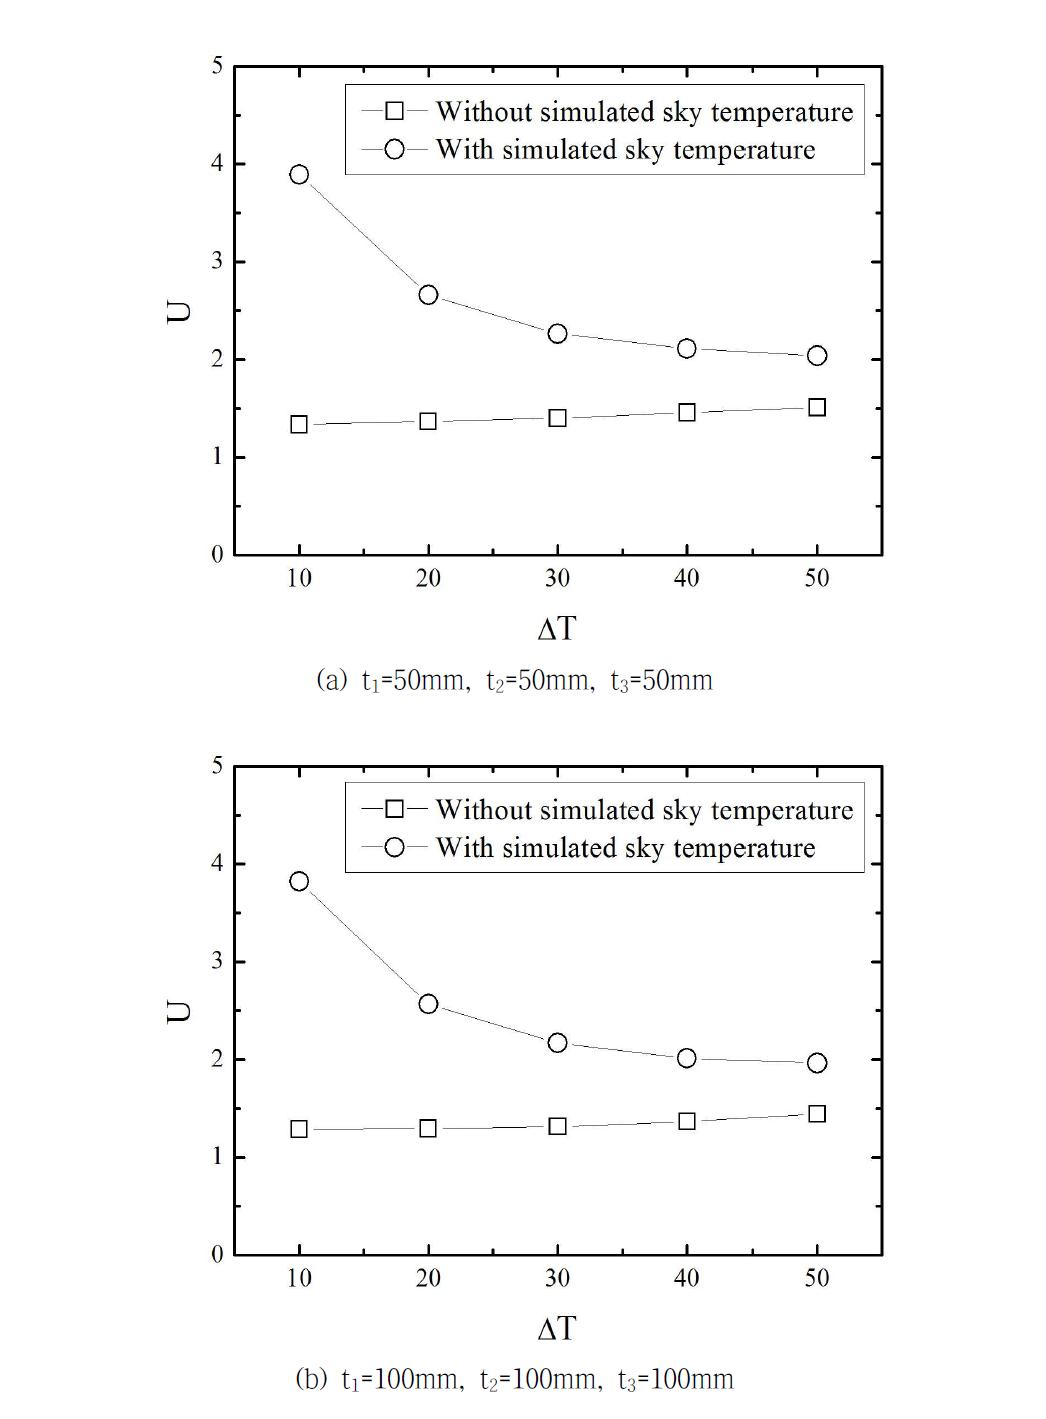 Distributions of overall heat transfer coefficients with variation of temperature difference for 4LW